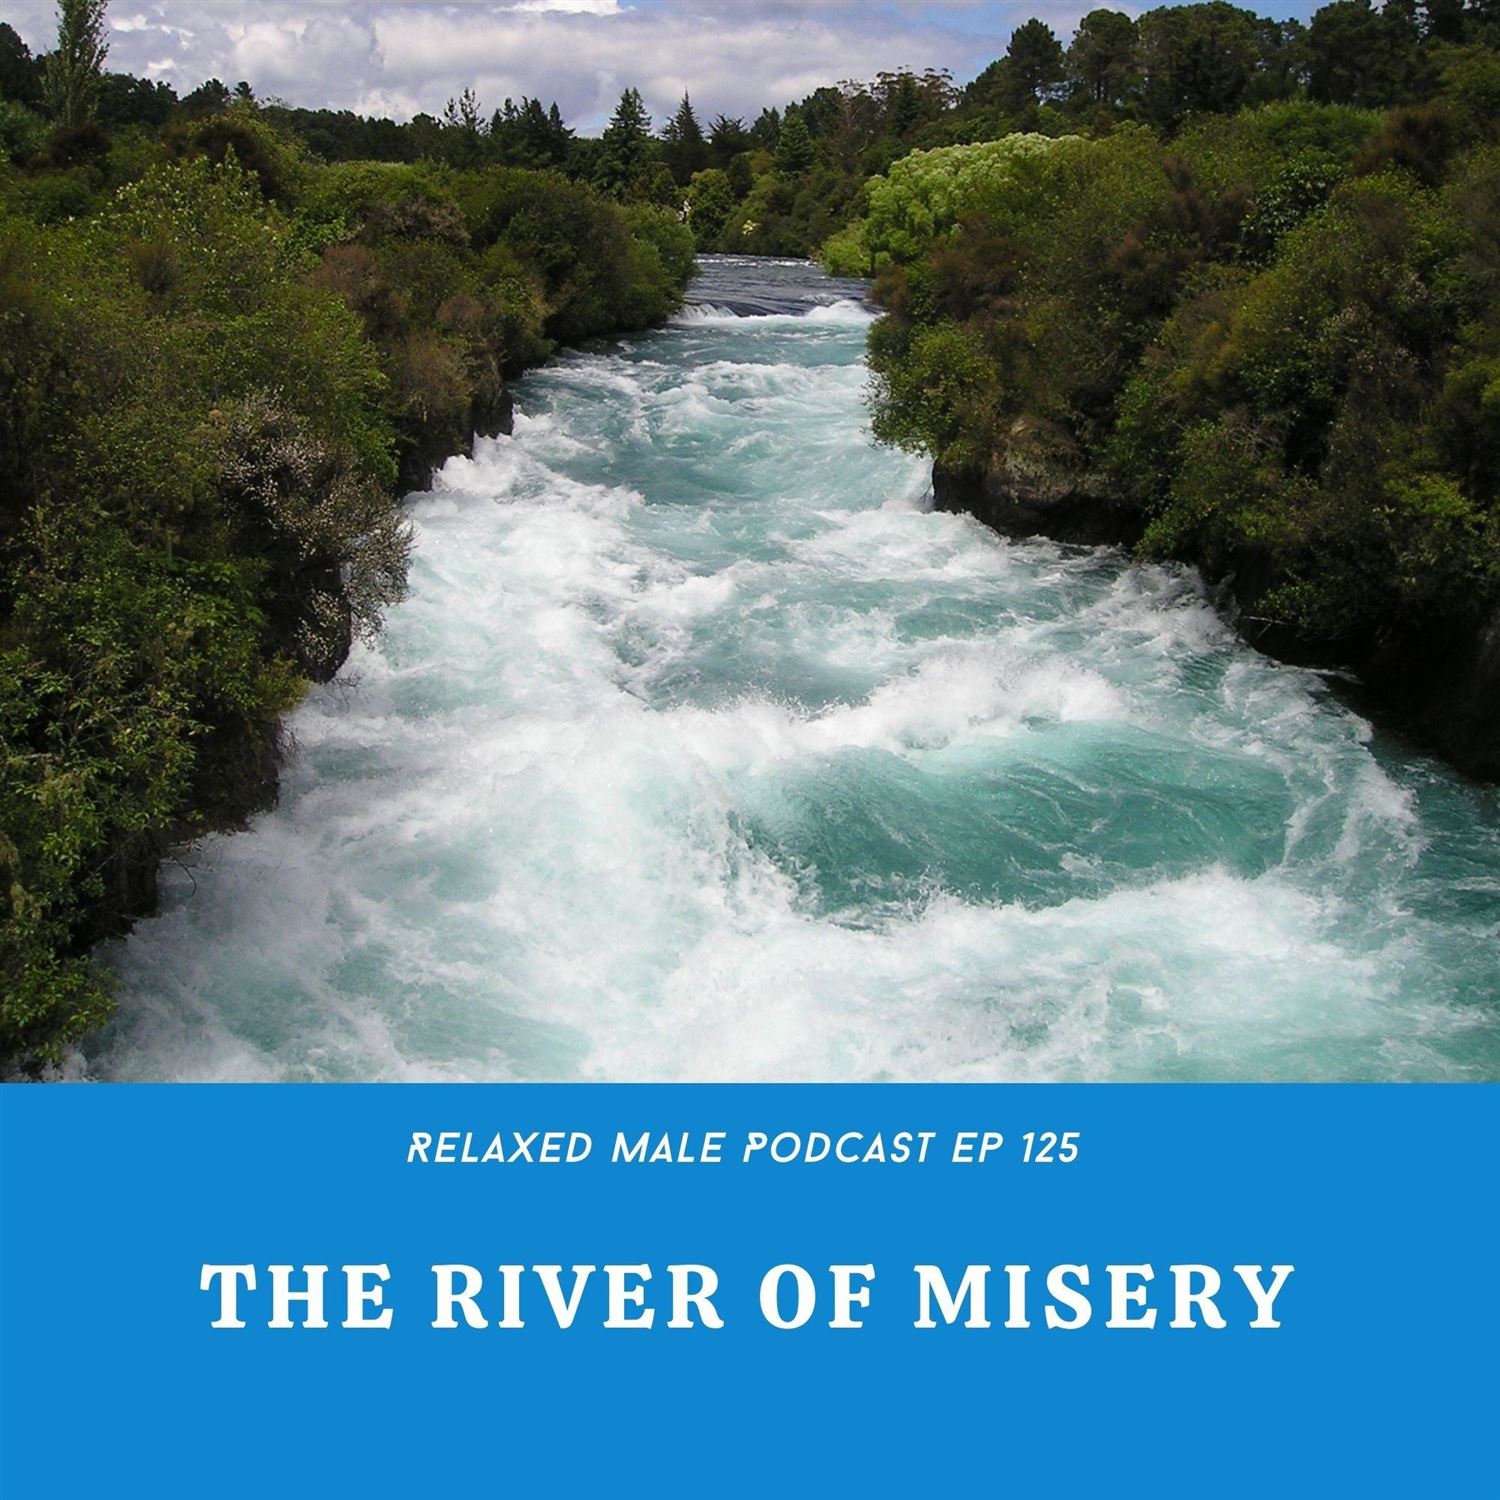 The River of Misery